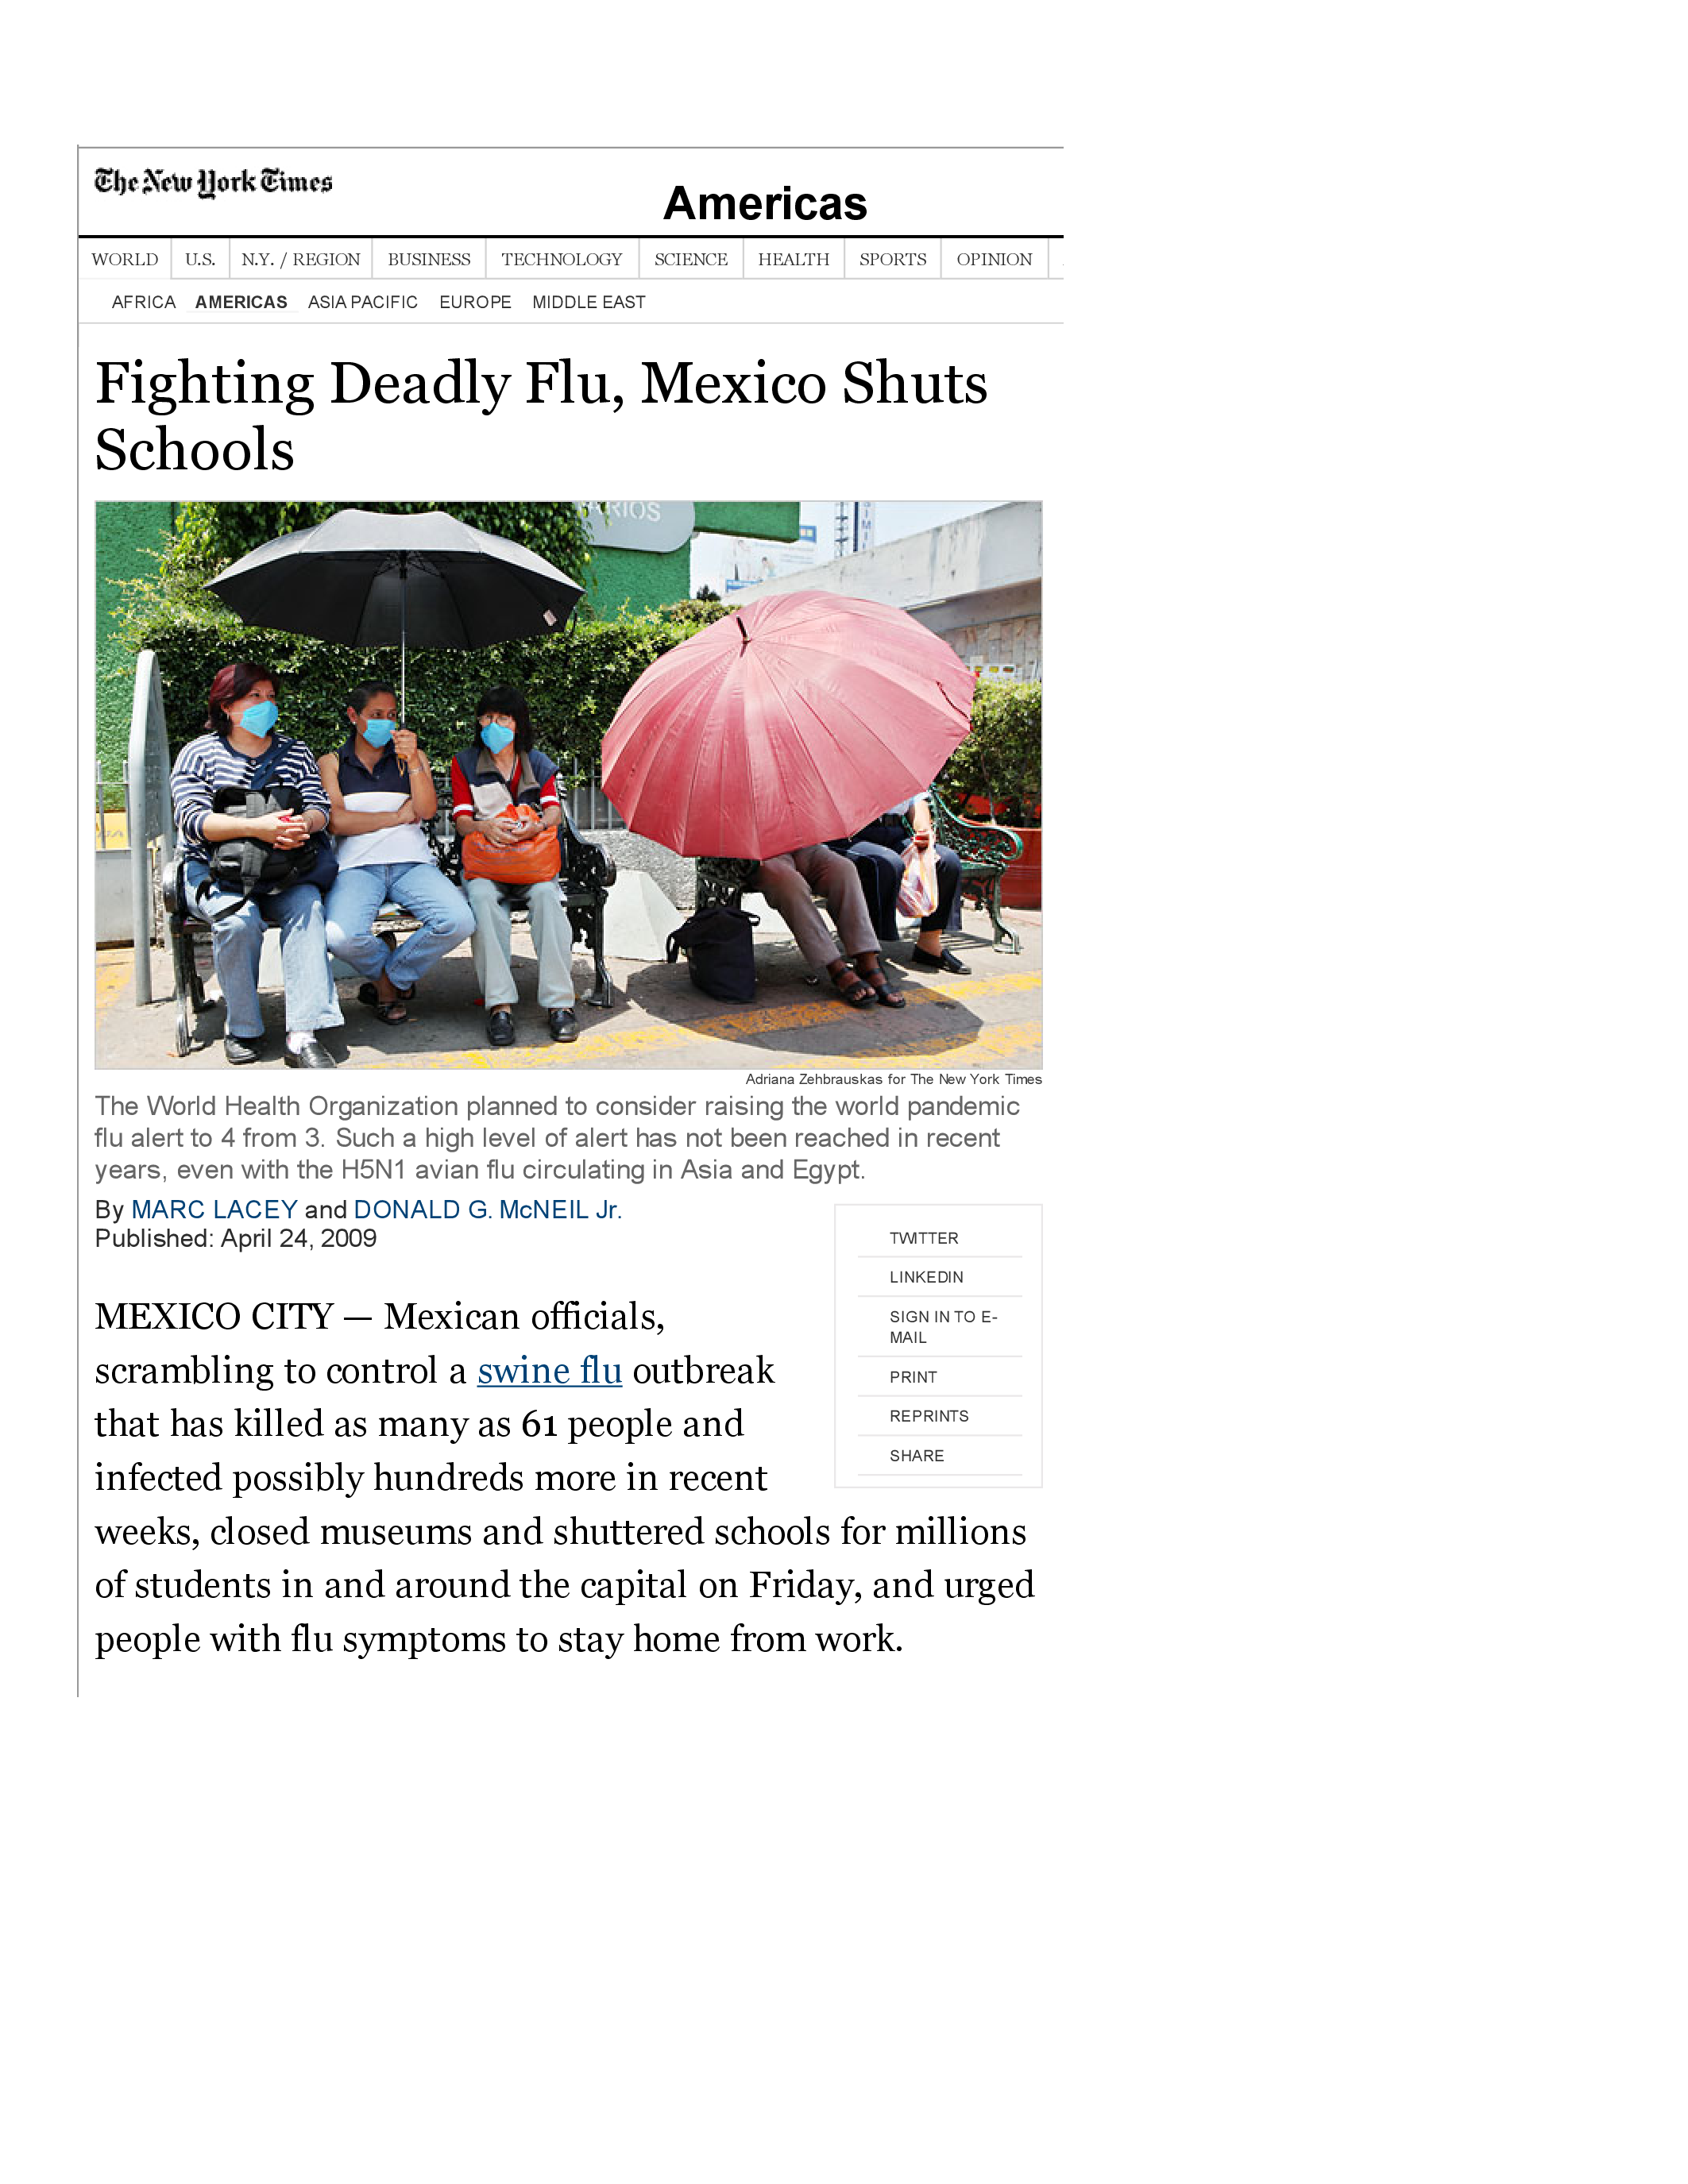 _images/2014-04-25_NYTimes.png